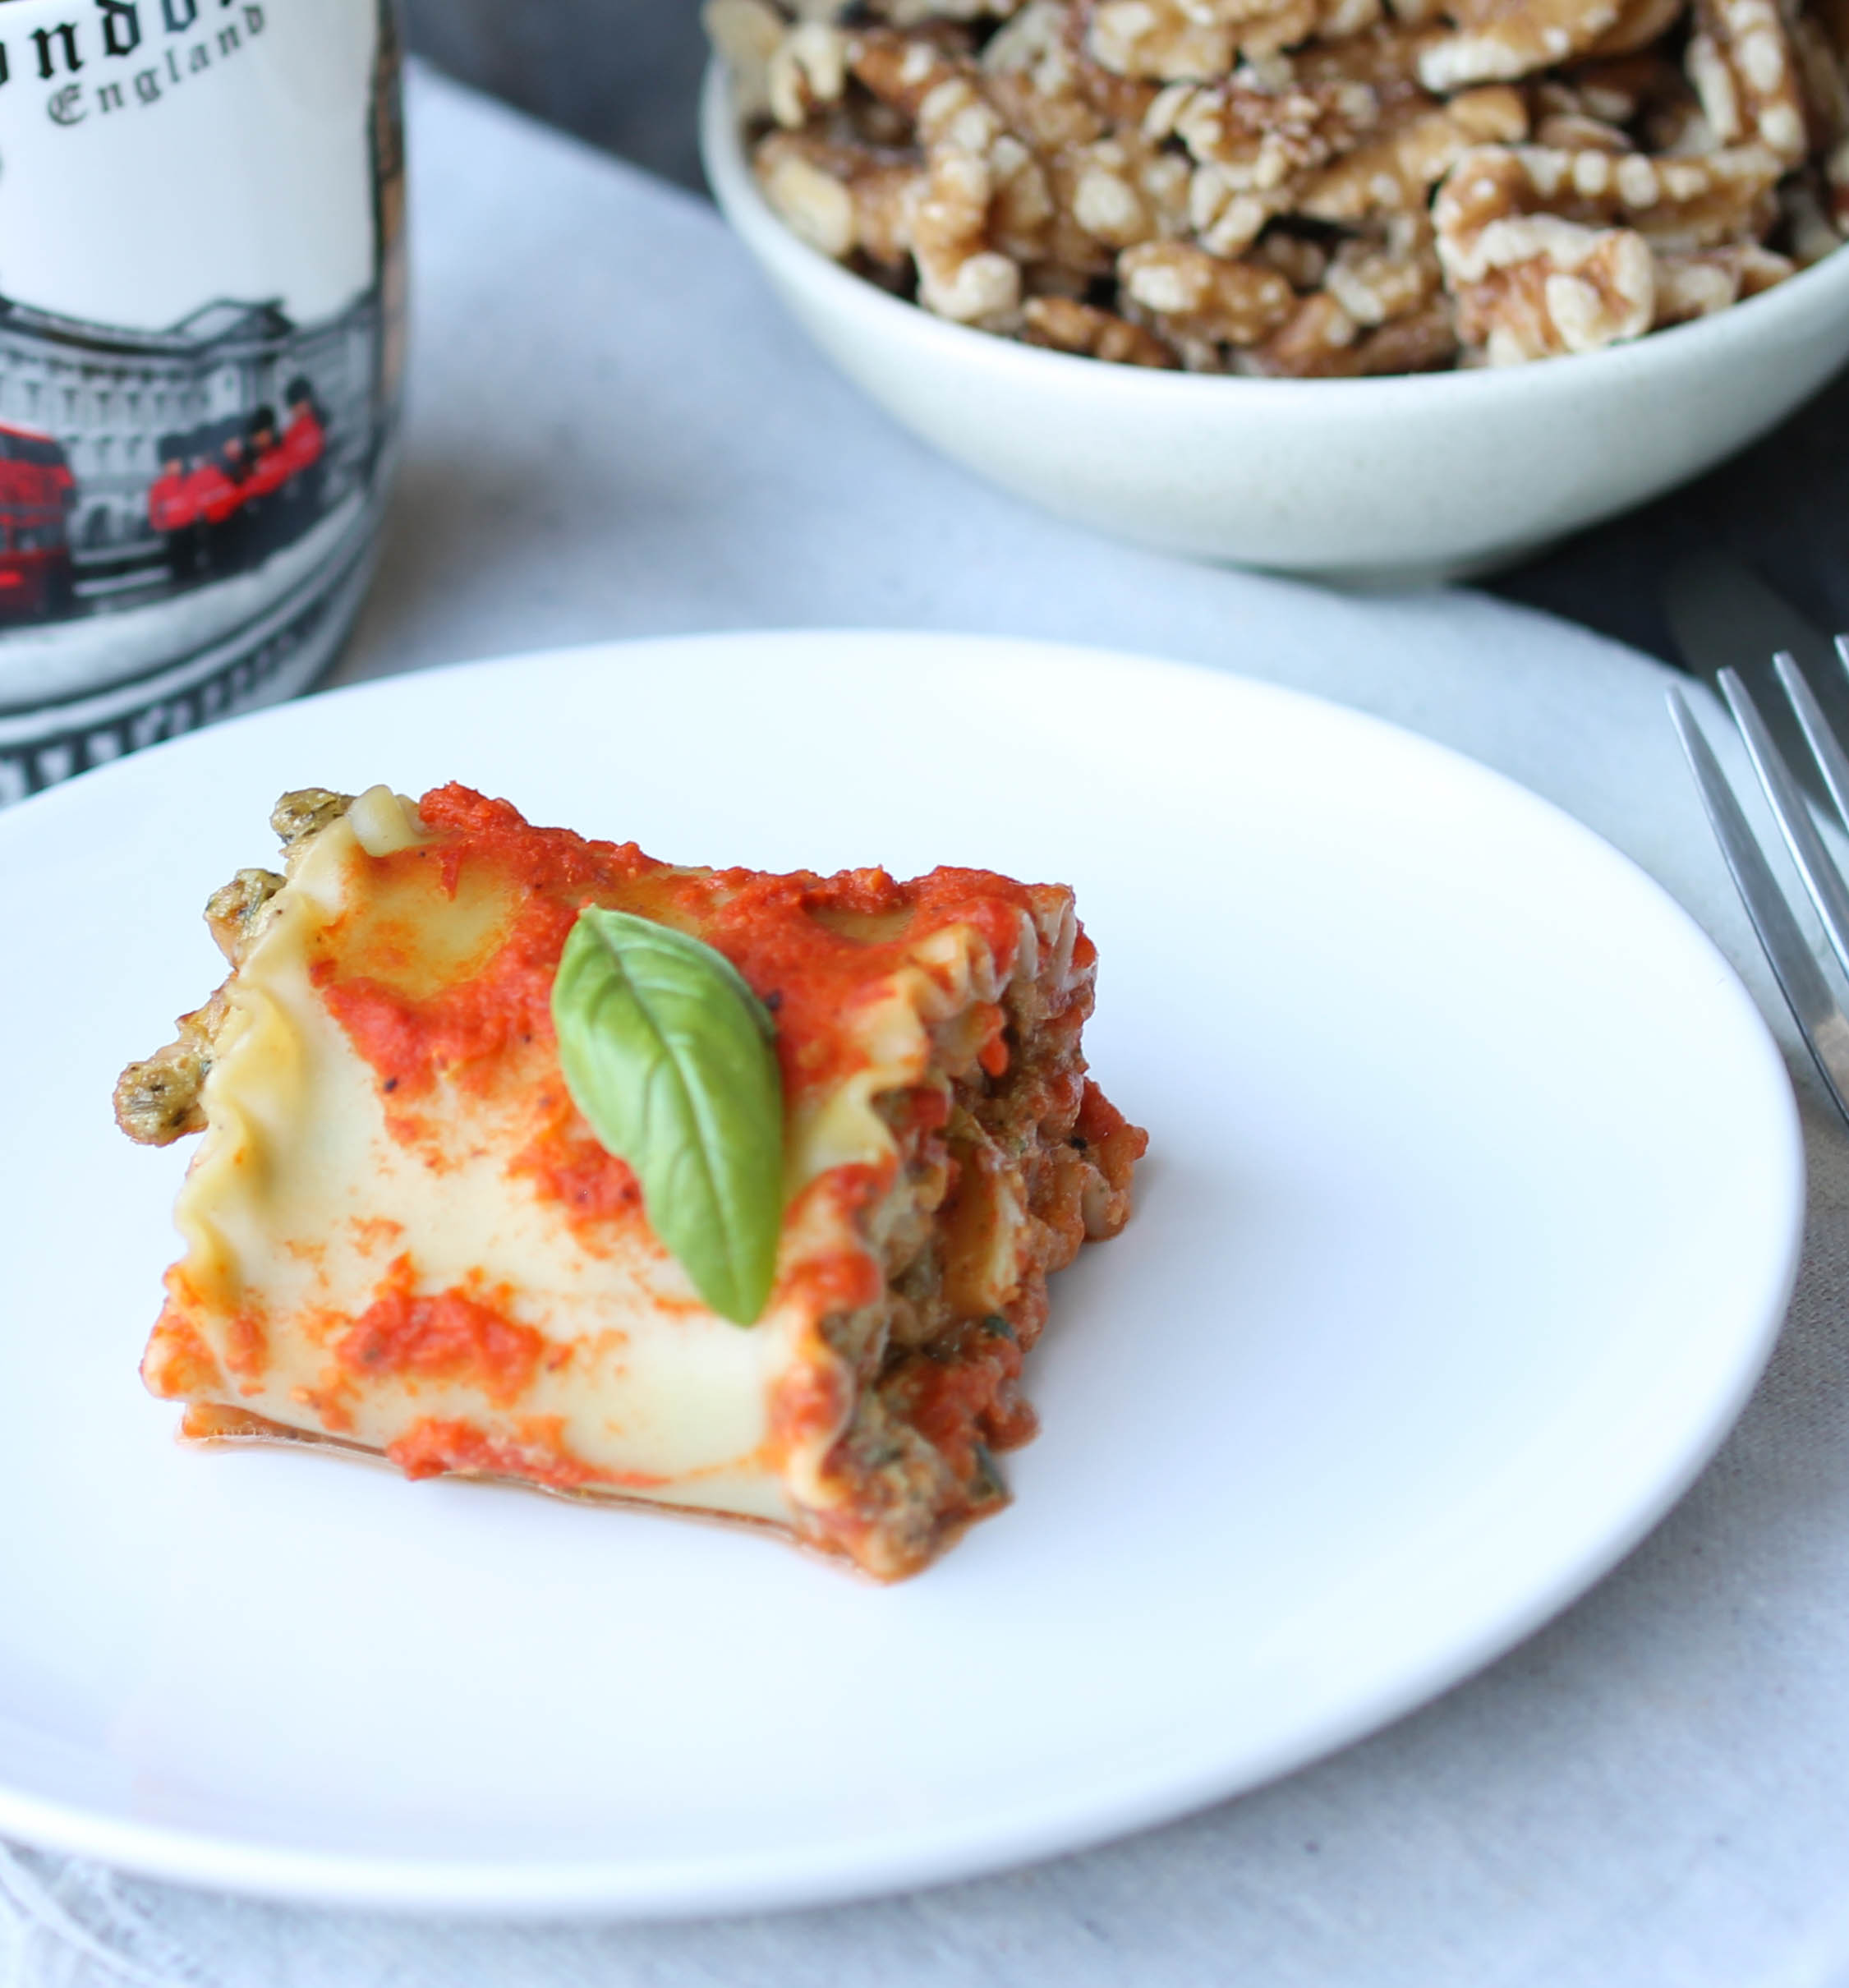 Vegan Lasagna Roll-Ups with Walnut Basil Sauce is dinner friendly, can be make-ahead, and comes together in within an hour.